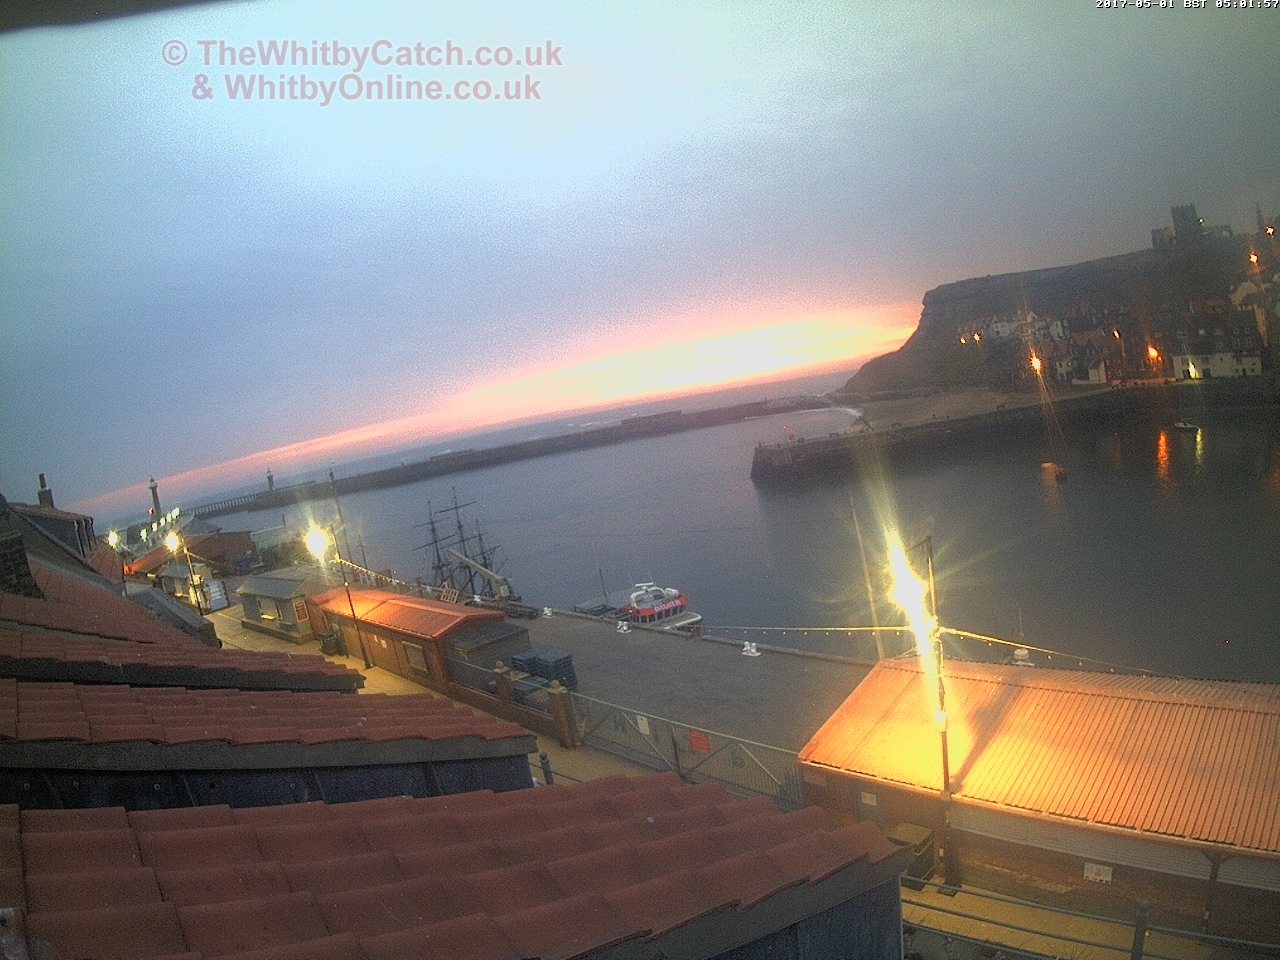 Whitby Mon 1st May 2017 05:02.